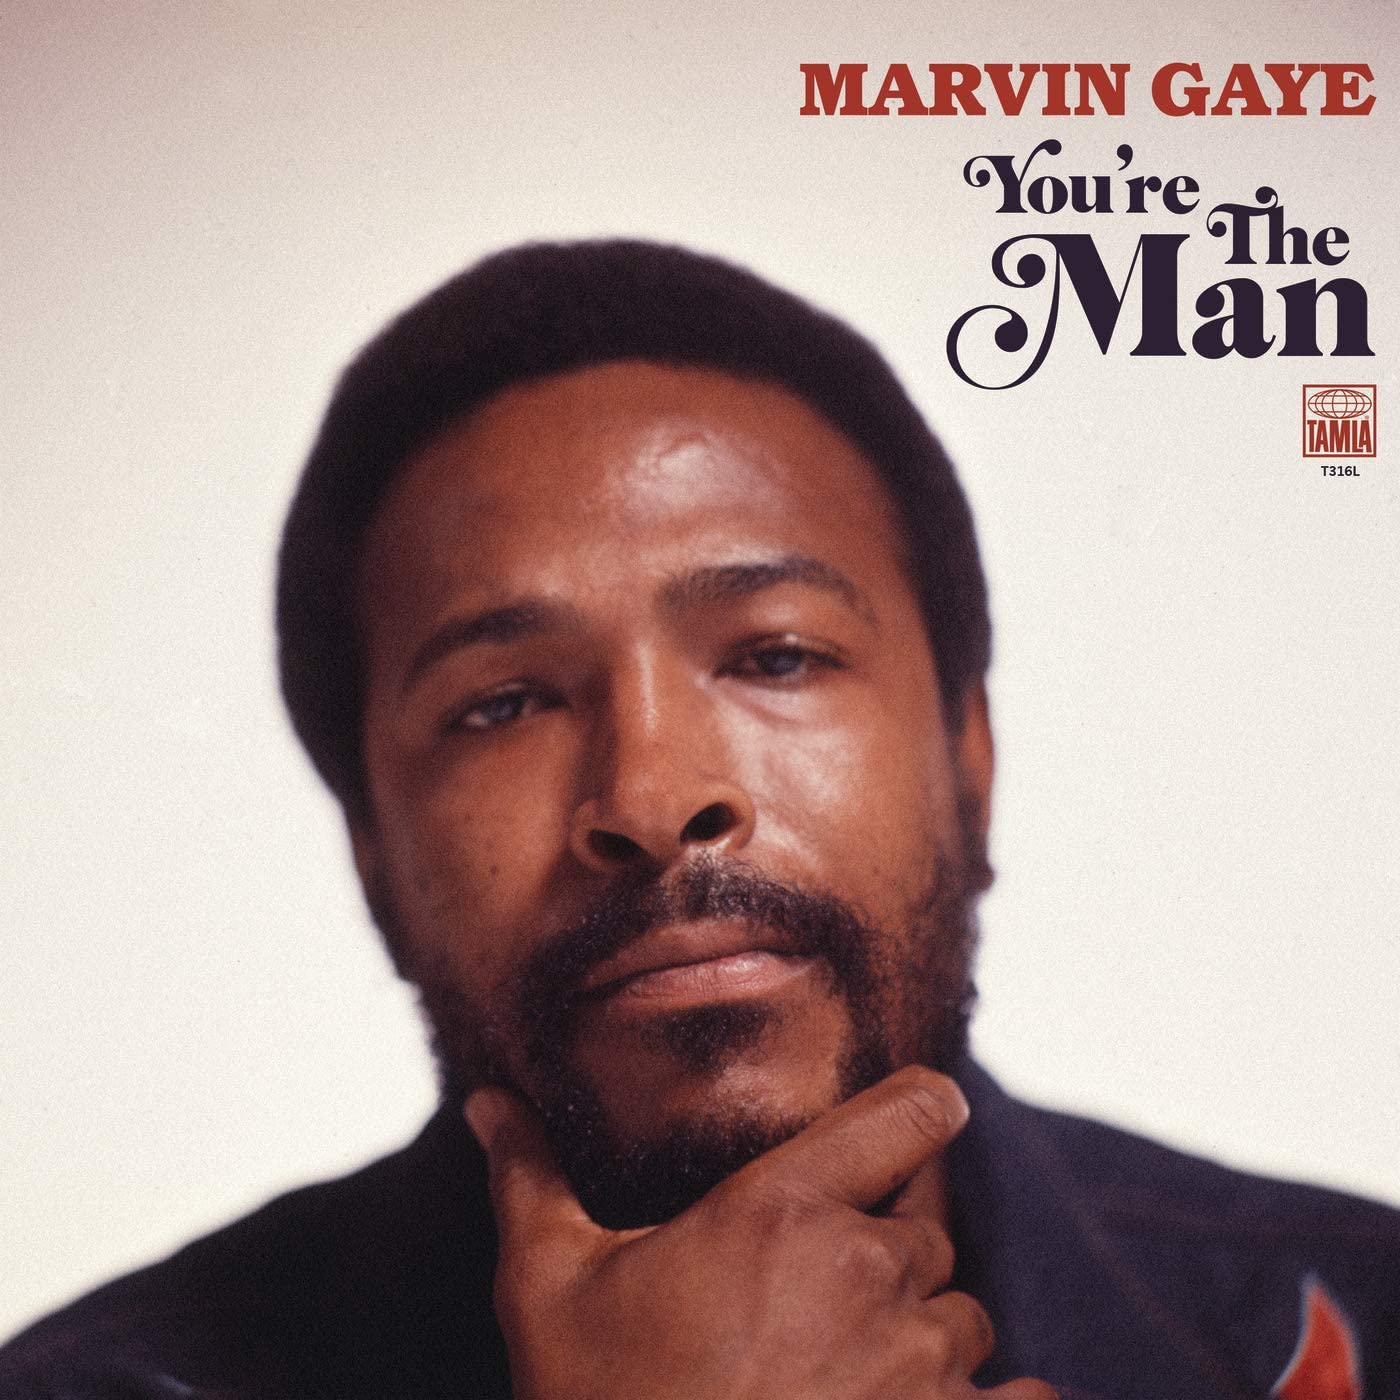 Gaye, Marvin/You're The Man [LP]